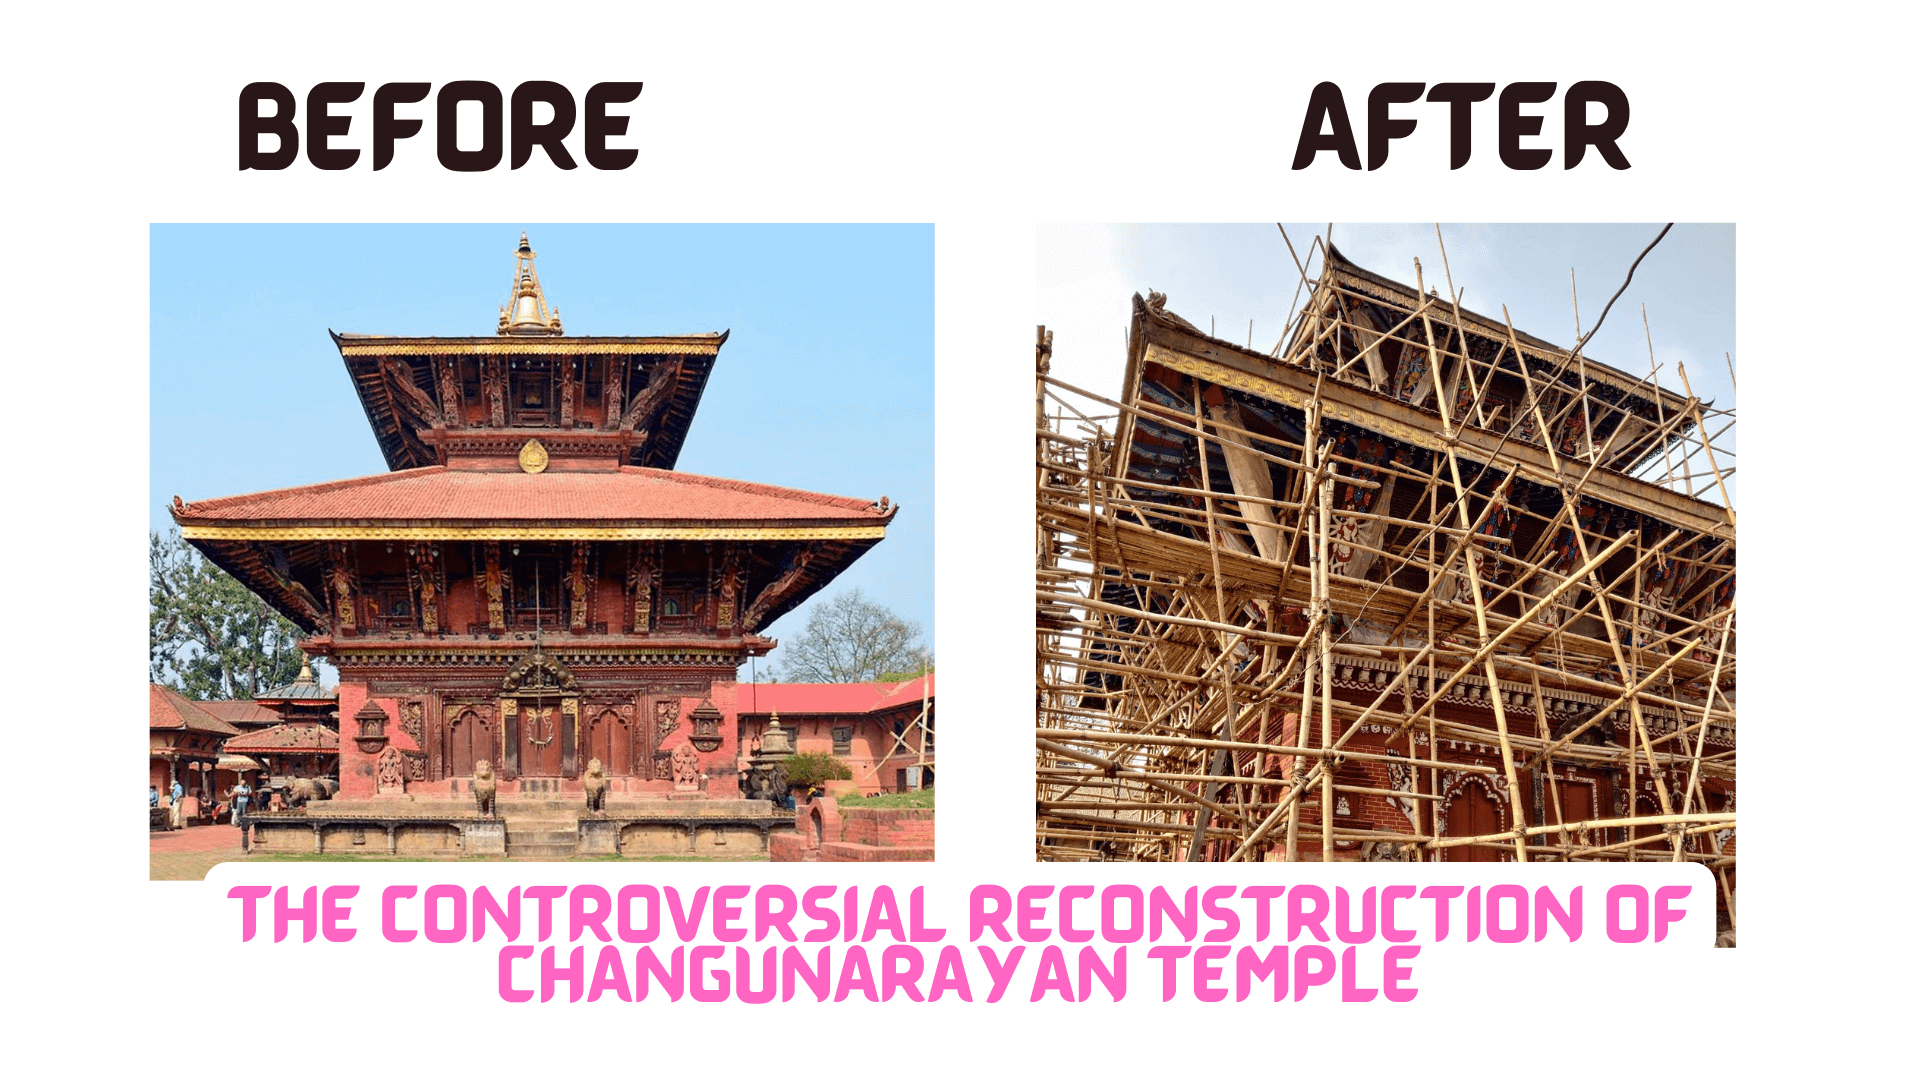 Before and After The Controversial Reconstruction of Changunarayan Temple